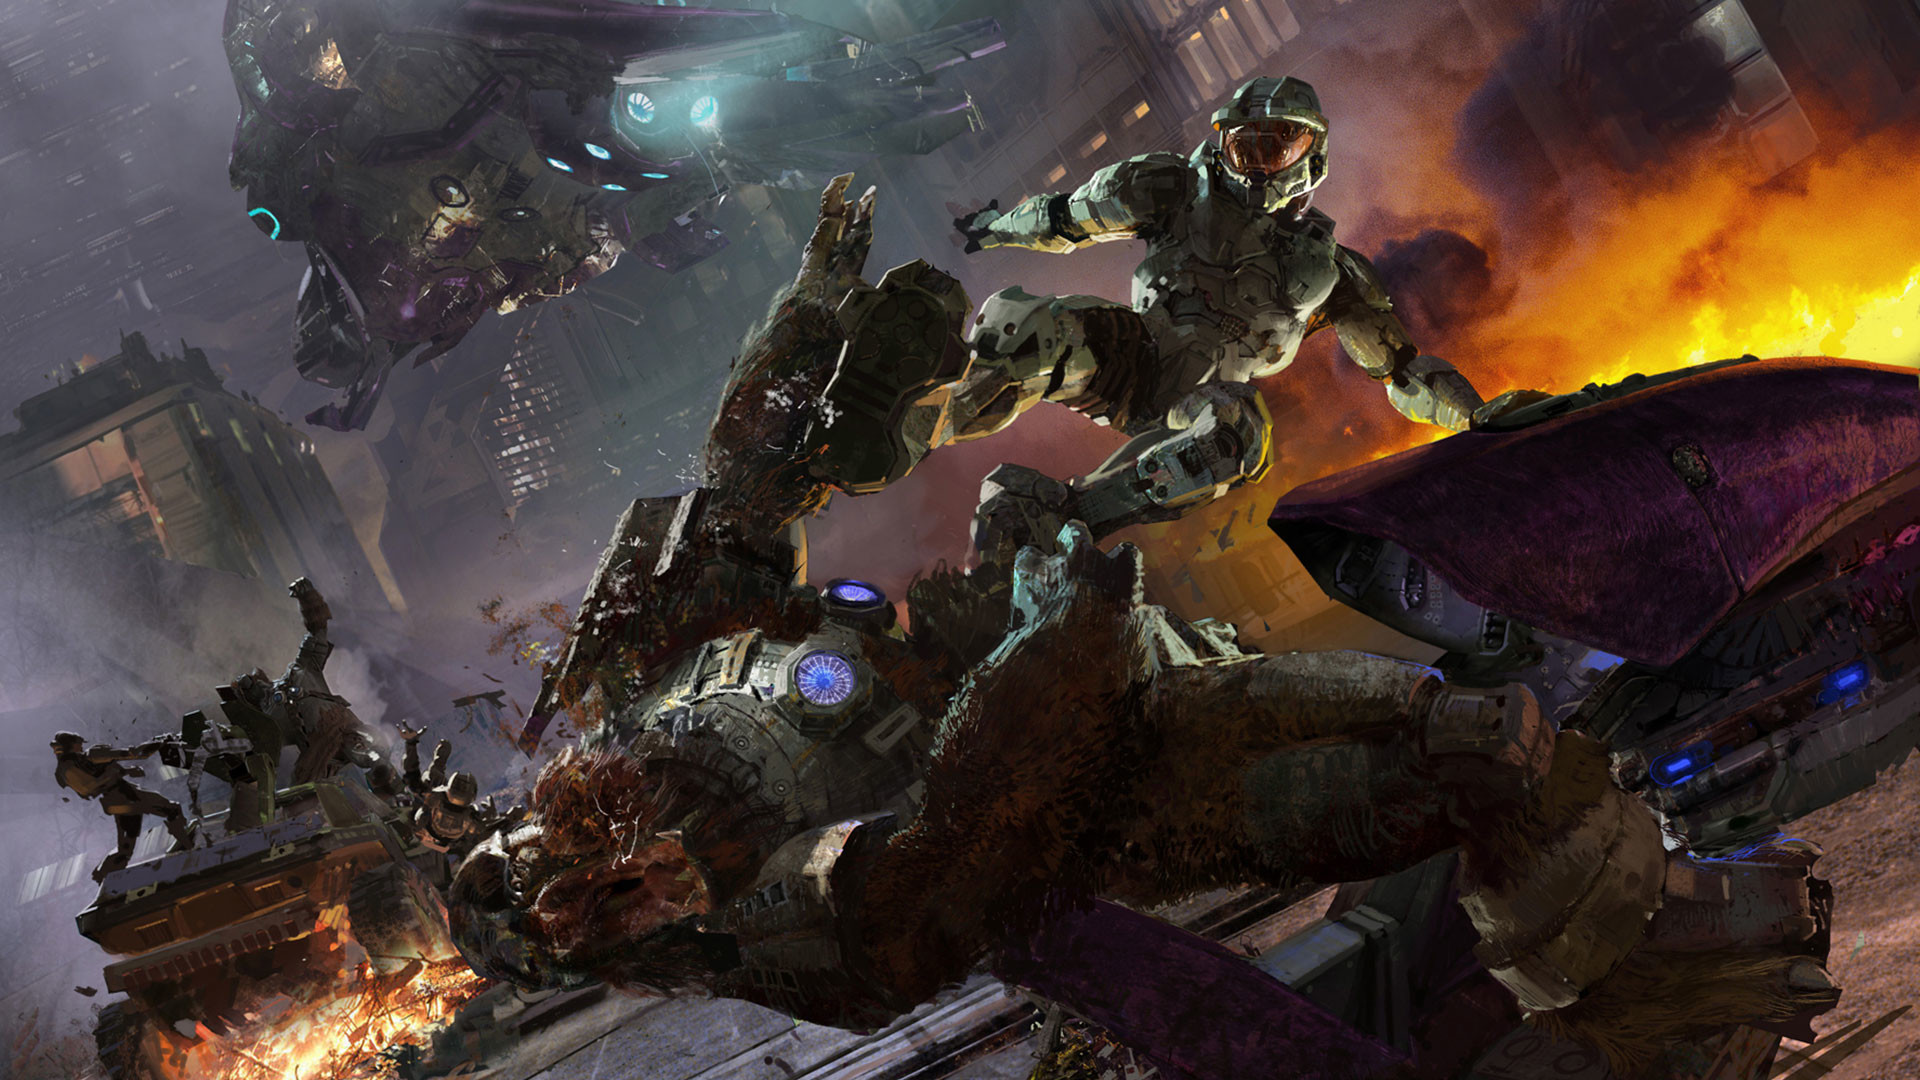 1920x1080 96+ Halo 2 Wallpaper  Hd Wallpapers - Example Resume And ..